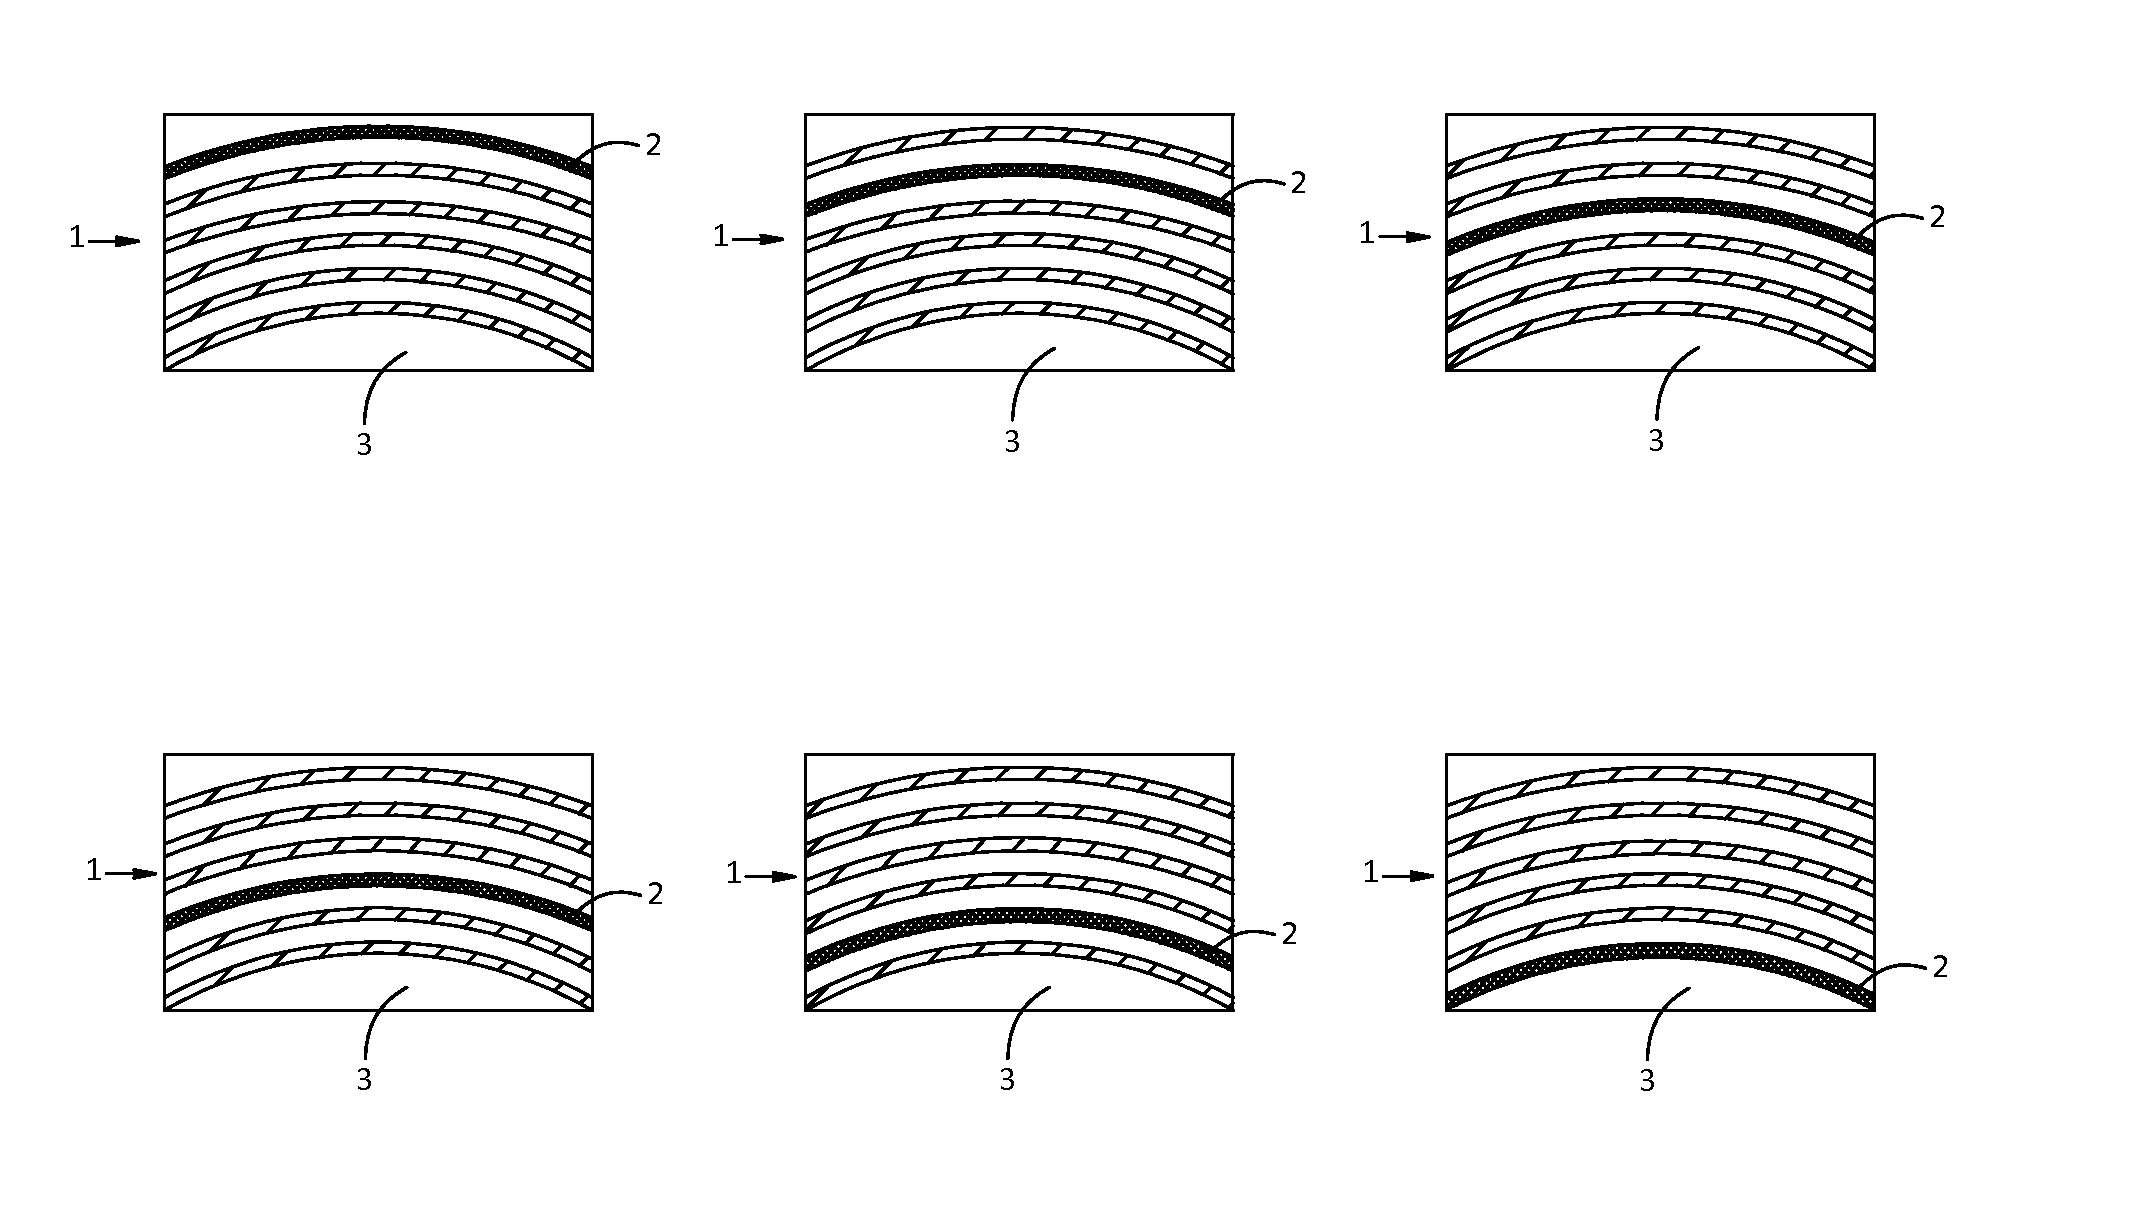 Implant with a visual indicator of a barrier layer